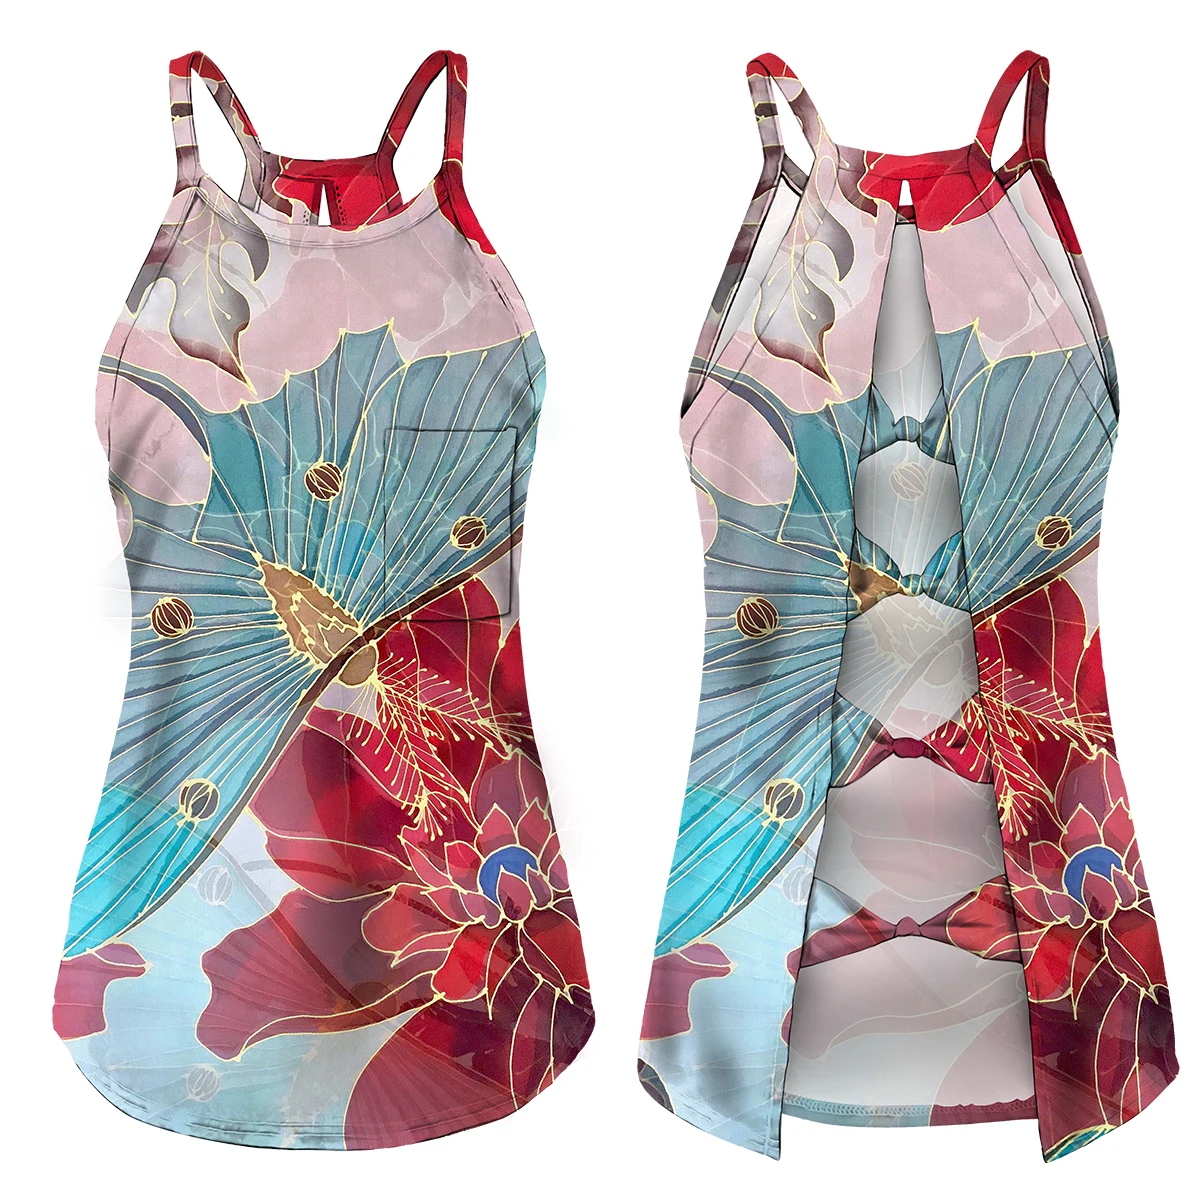 cami top Summer Fashion Women 3D Butterfly Floral Printed Bow Tie Hollow Out Back Sleeveless Vests Streetwear Sexy Top Clothes Chalecos camisole bra Tanks & Camis